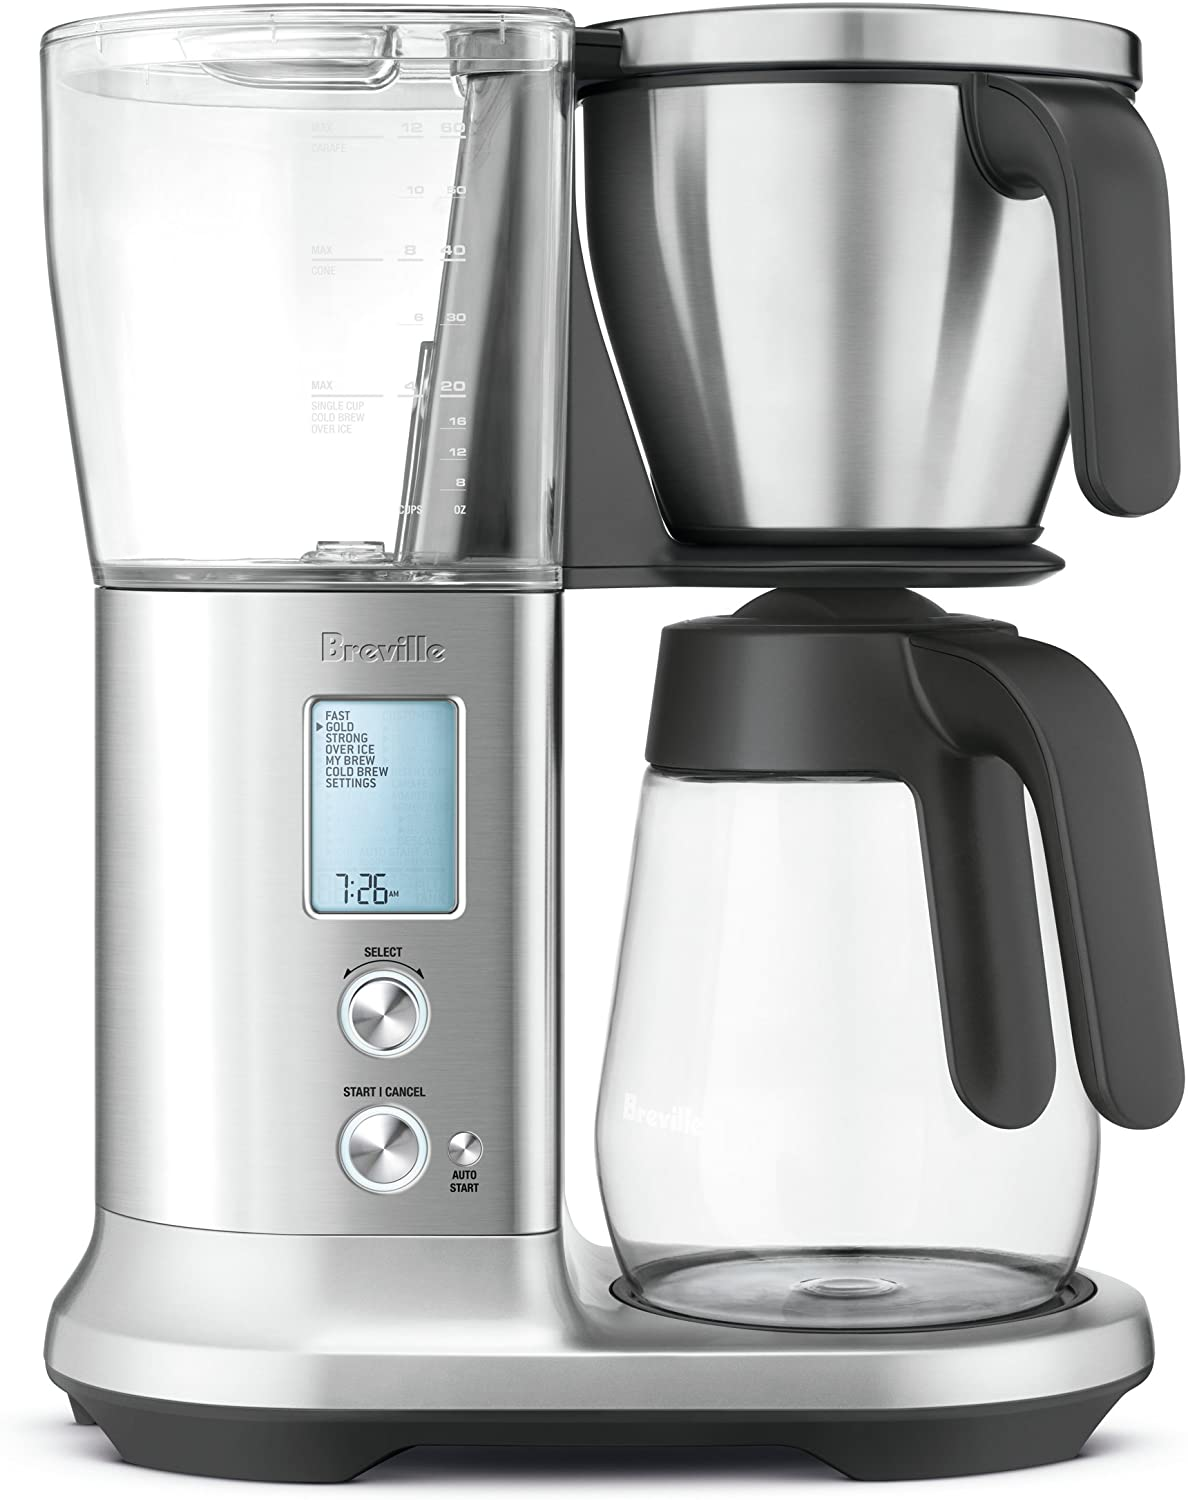 Amazon.com: Breville BDC400BSS Precision Brewer Glass, Coffee Maker, Brushed Stainless Steel: Home & Kitchen $267